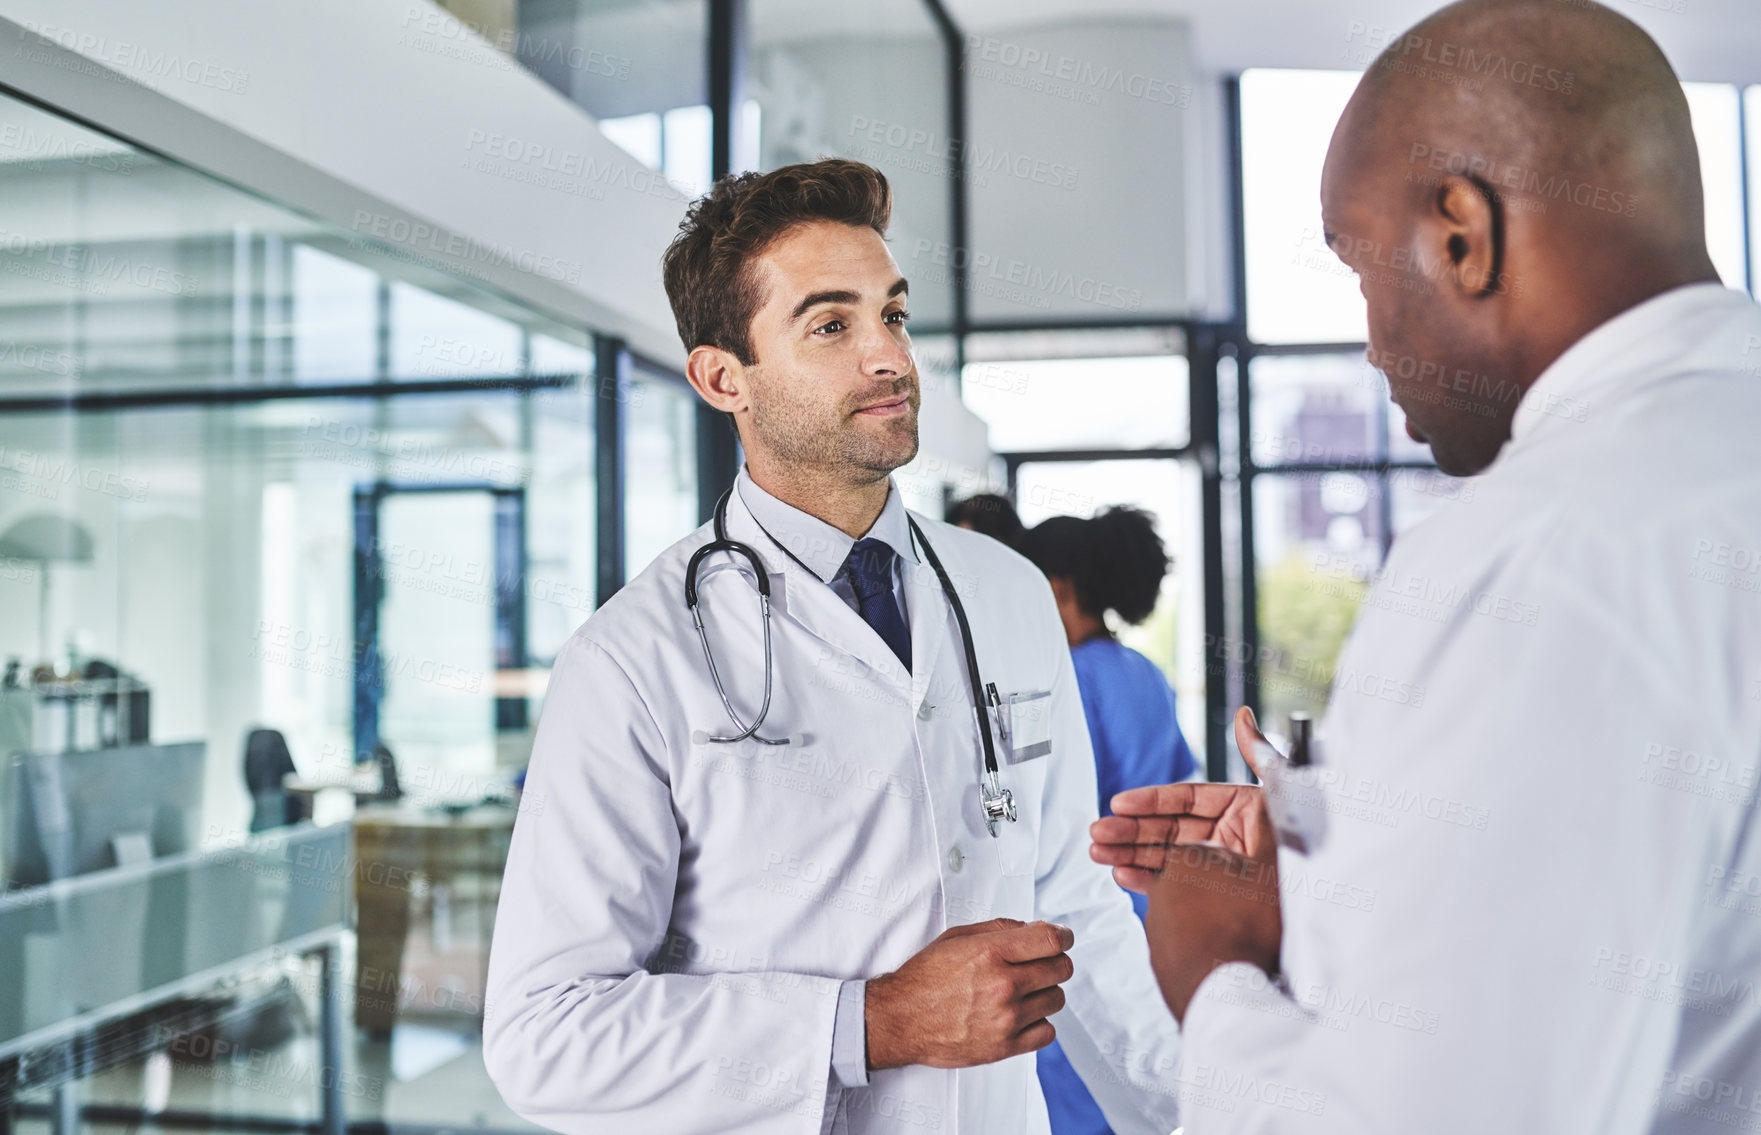 Buy stock photo Shot of two doctors having a discussion in a hospital